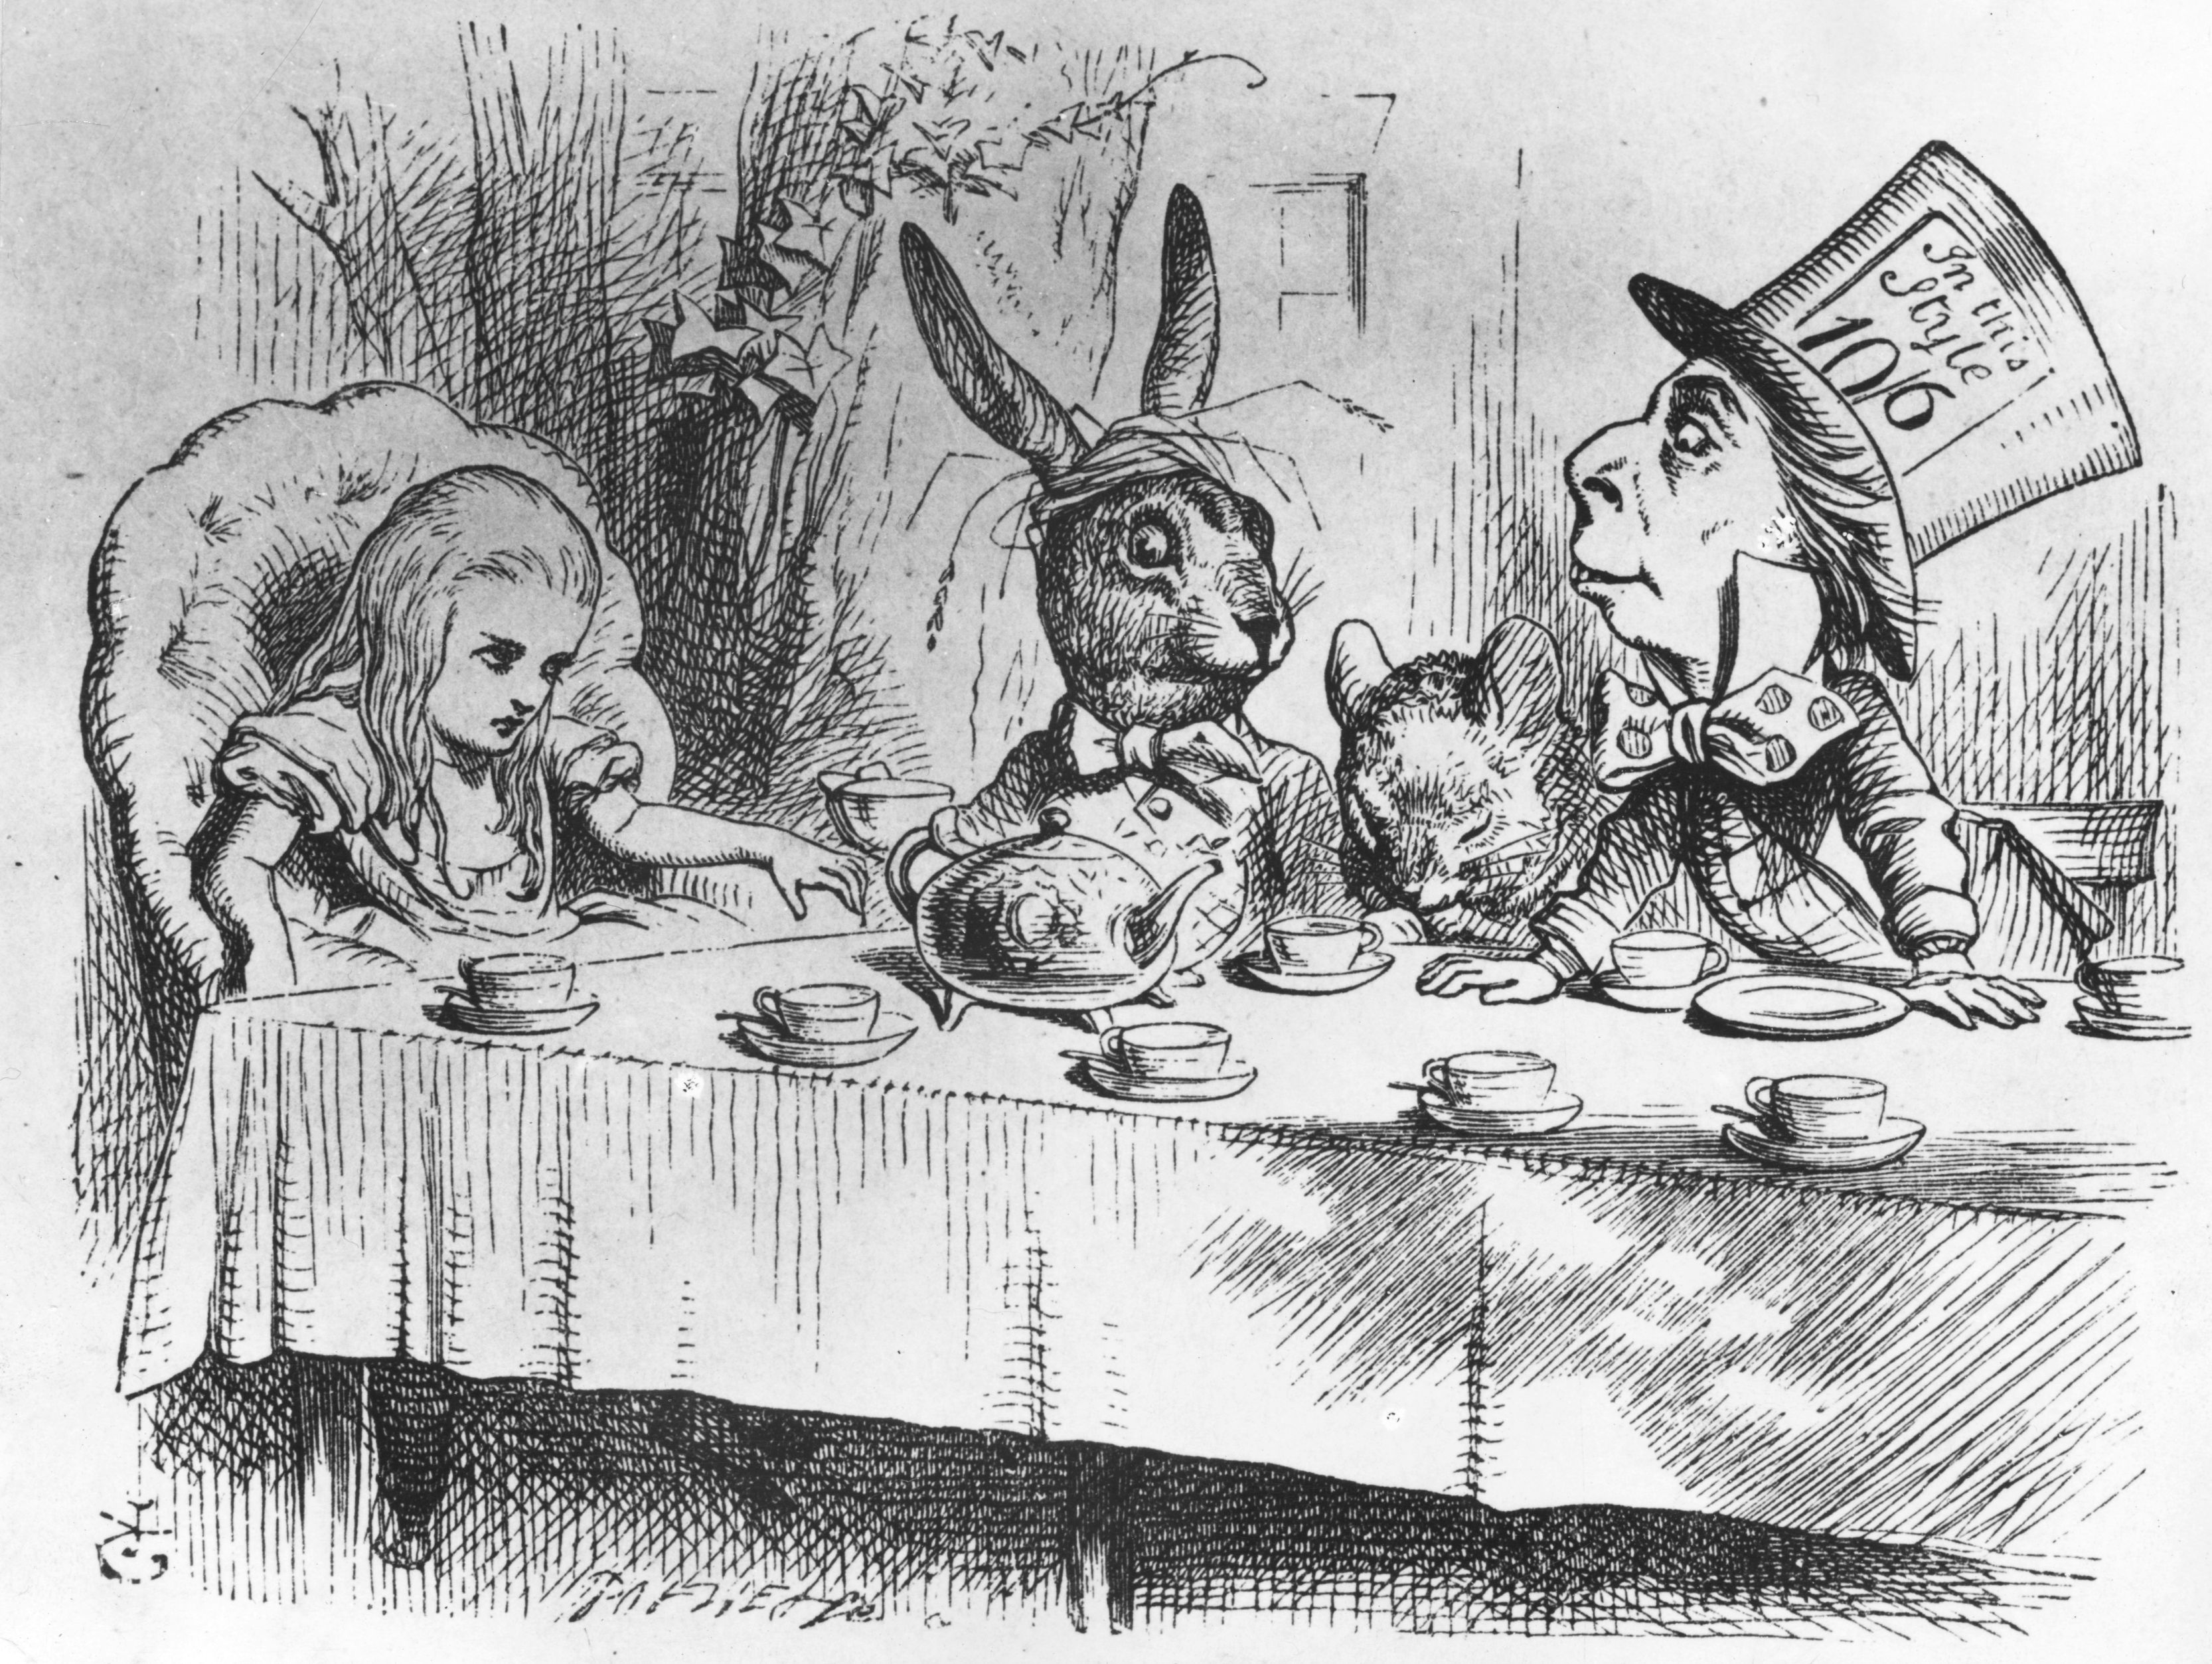 Lewis Carroll and the real Alice in Wonderland